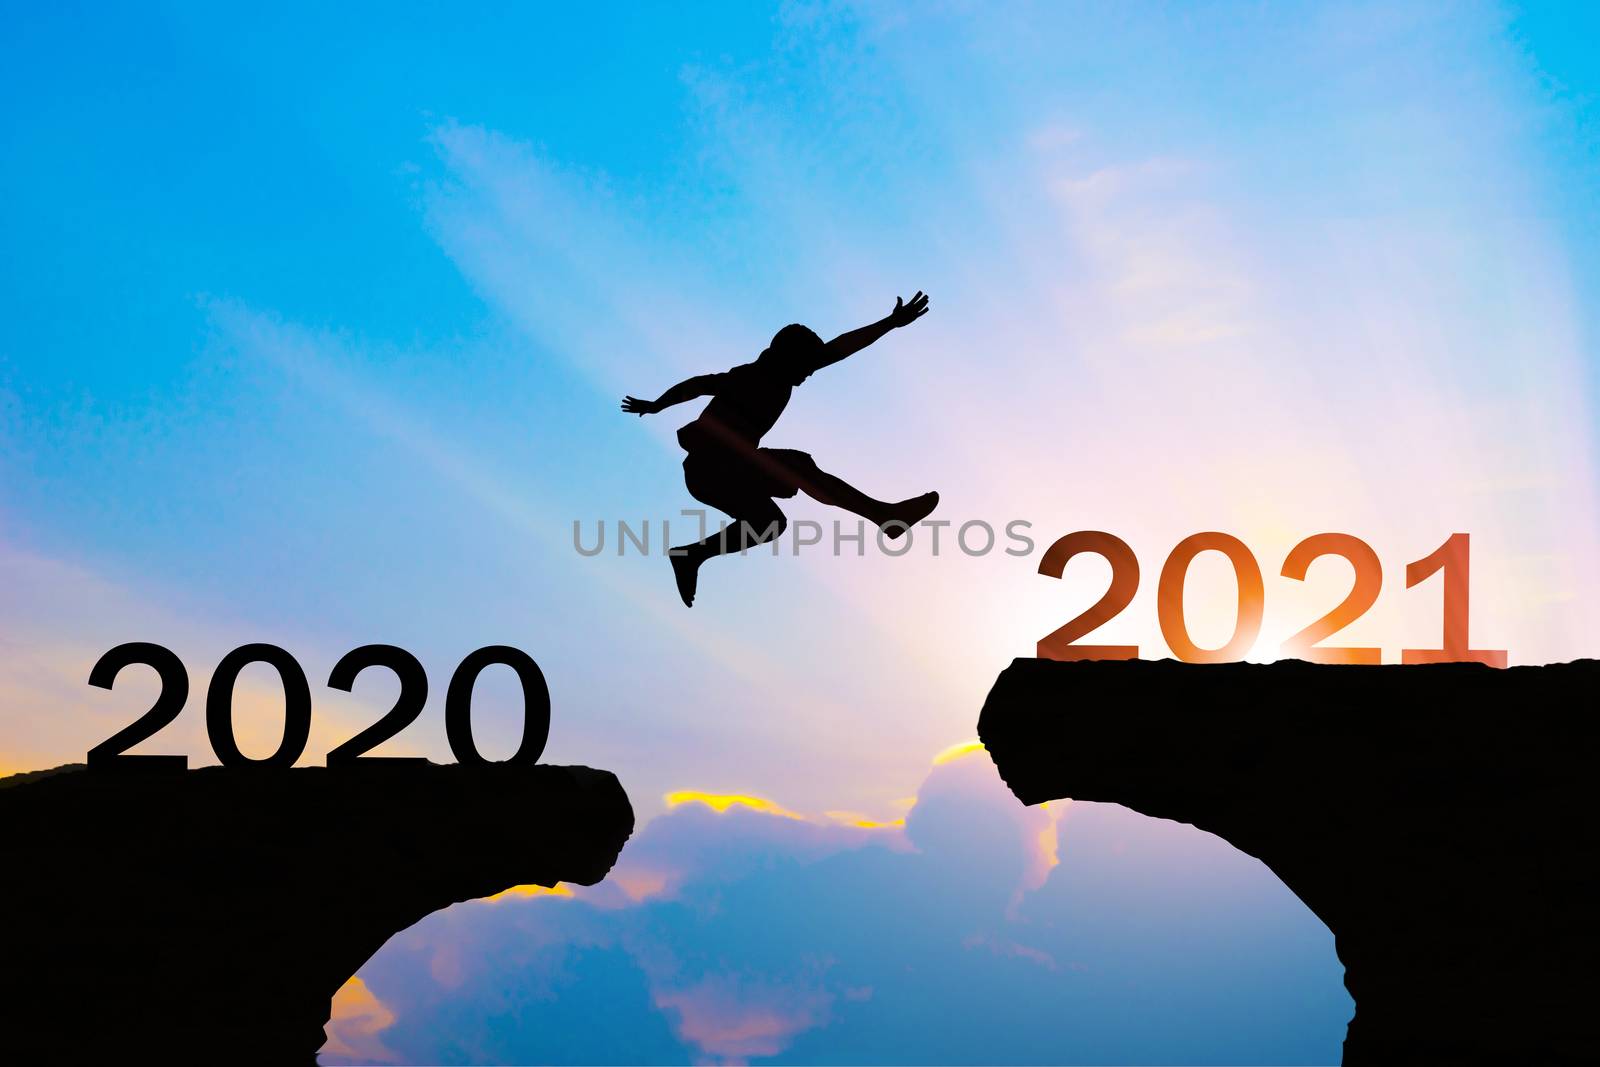 Man jump silhouette between year 2020 and 2021 new year concept. by sompongtom